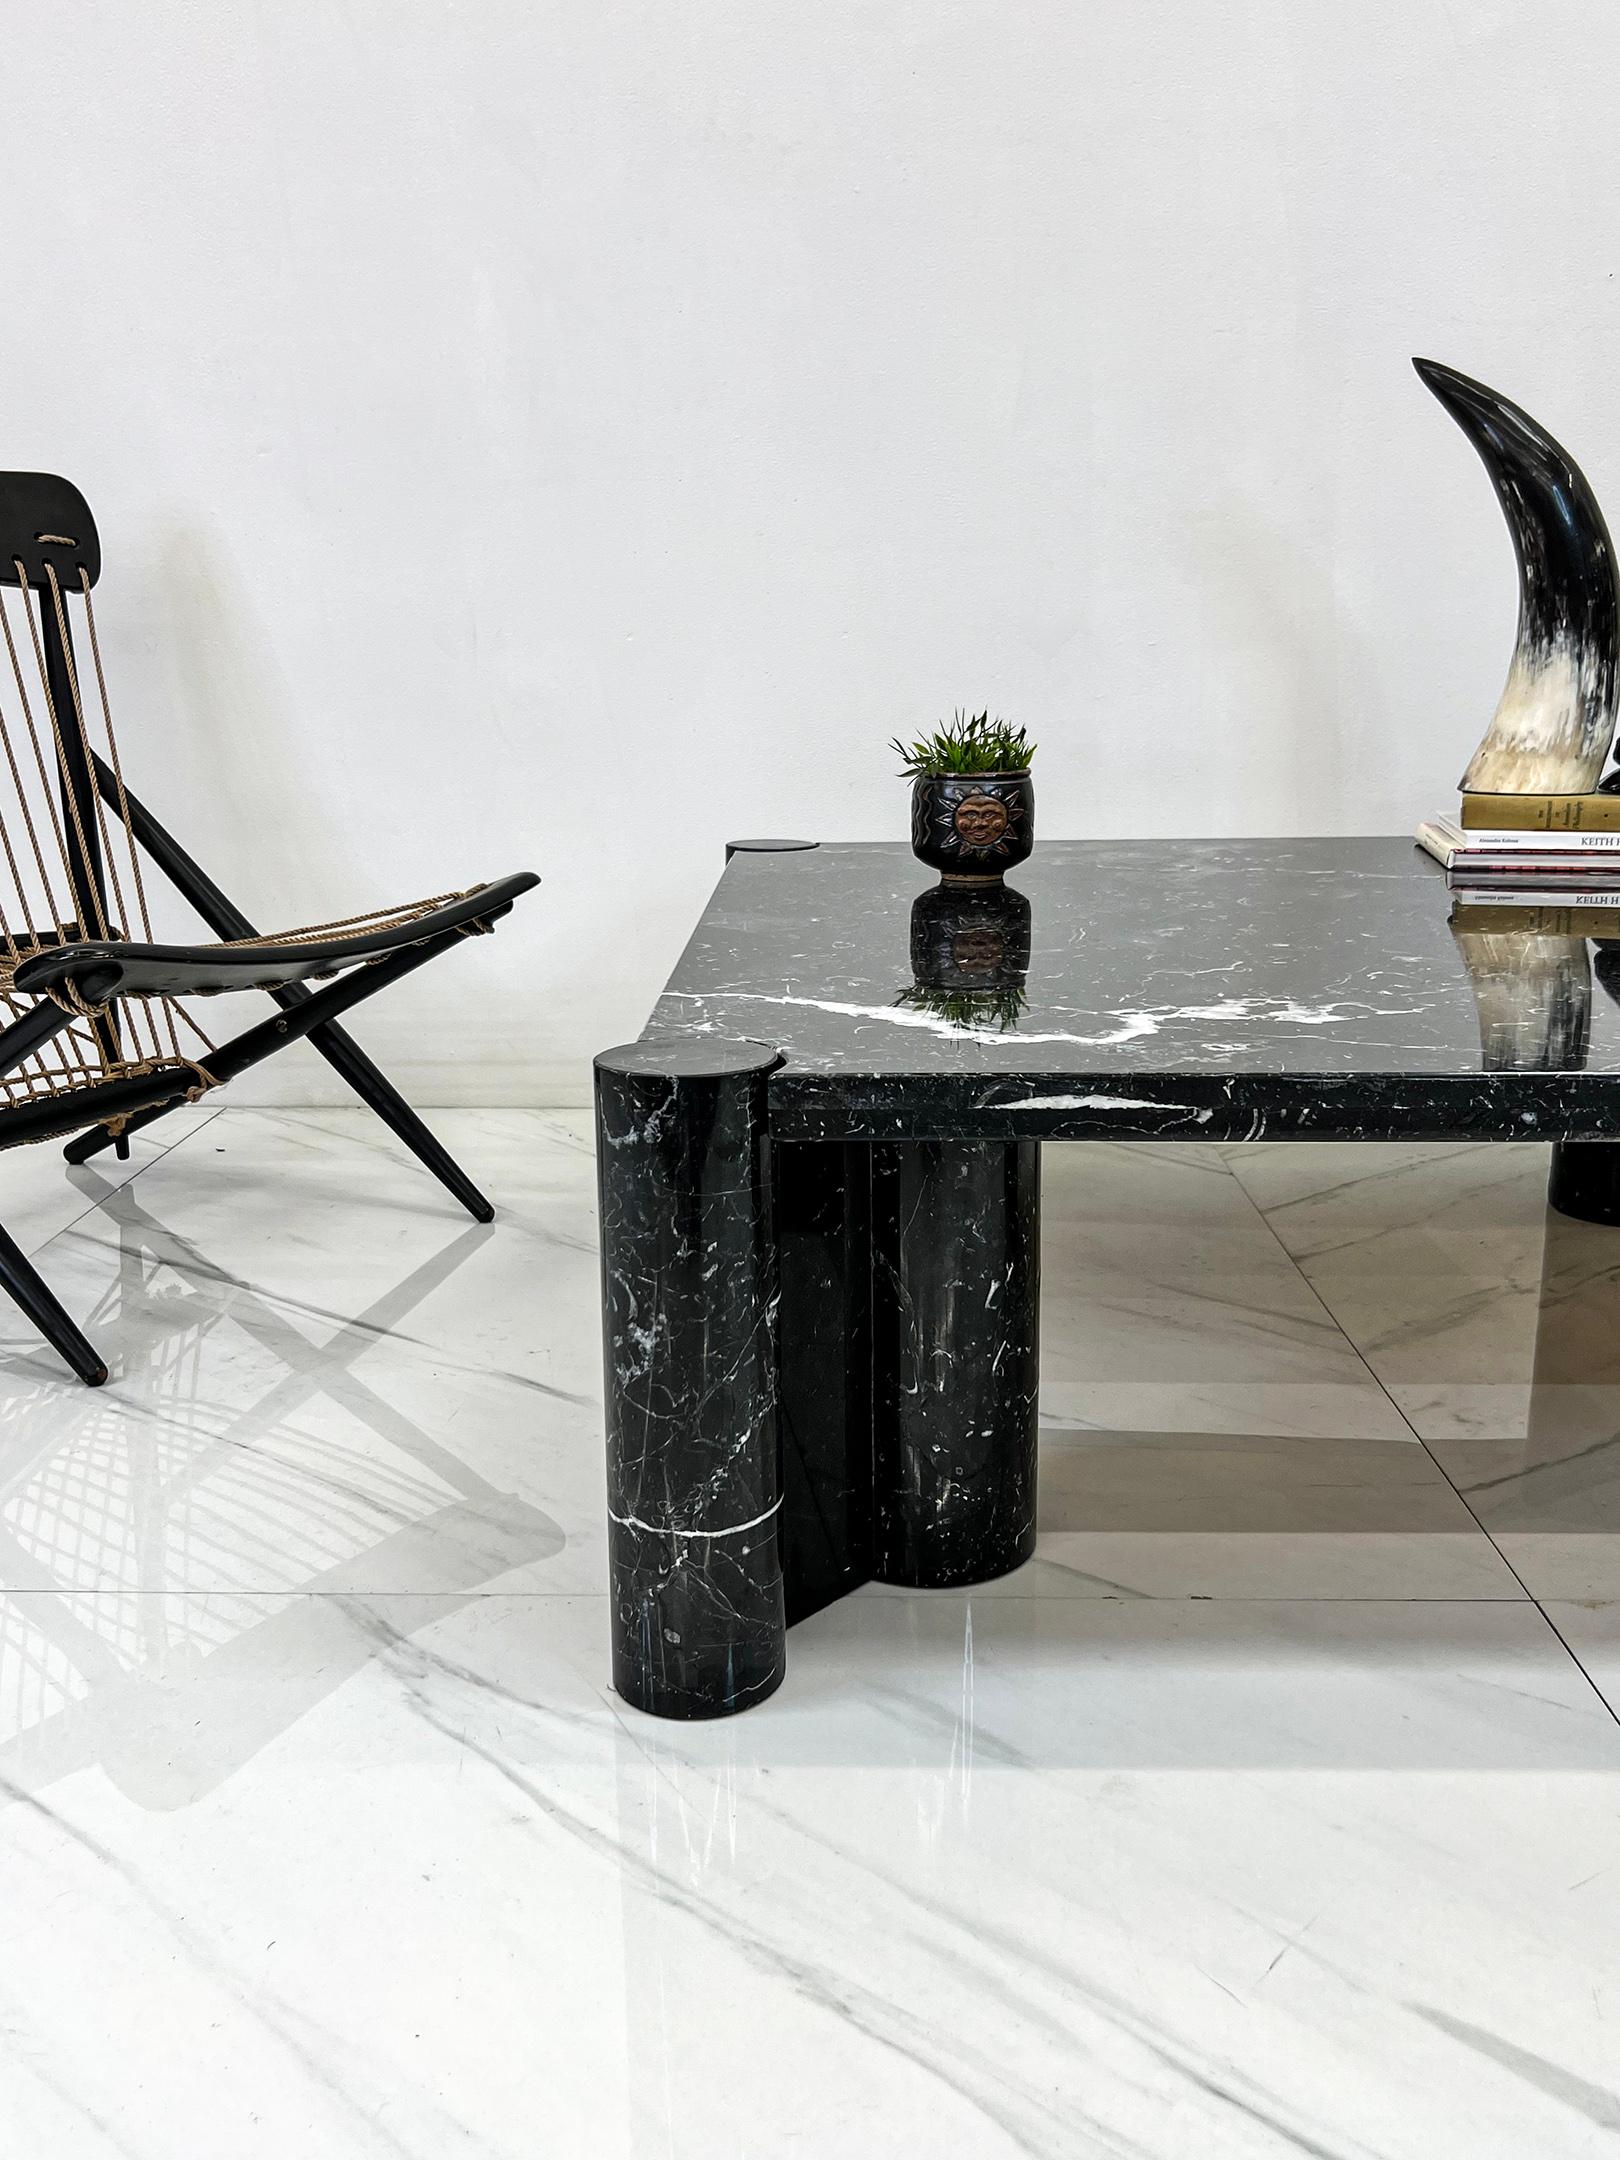 Gae Aulenti Jumbo Coffee Table for Knoll in Nero Marquina Marble 3